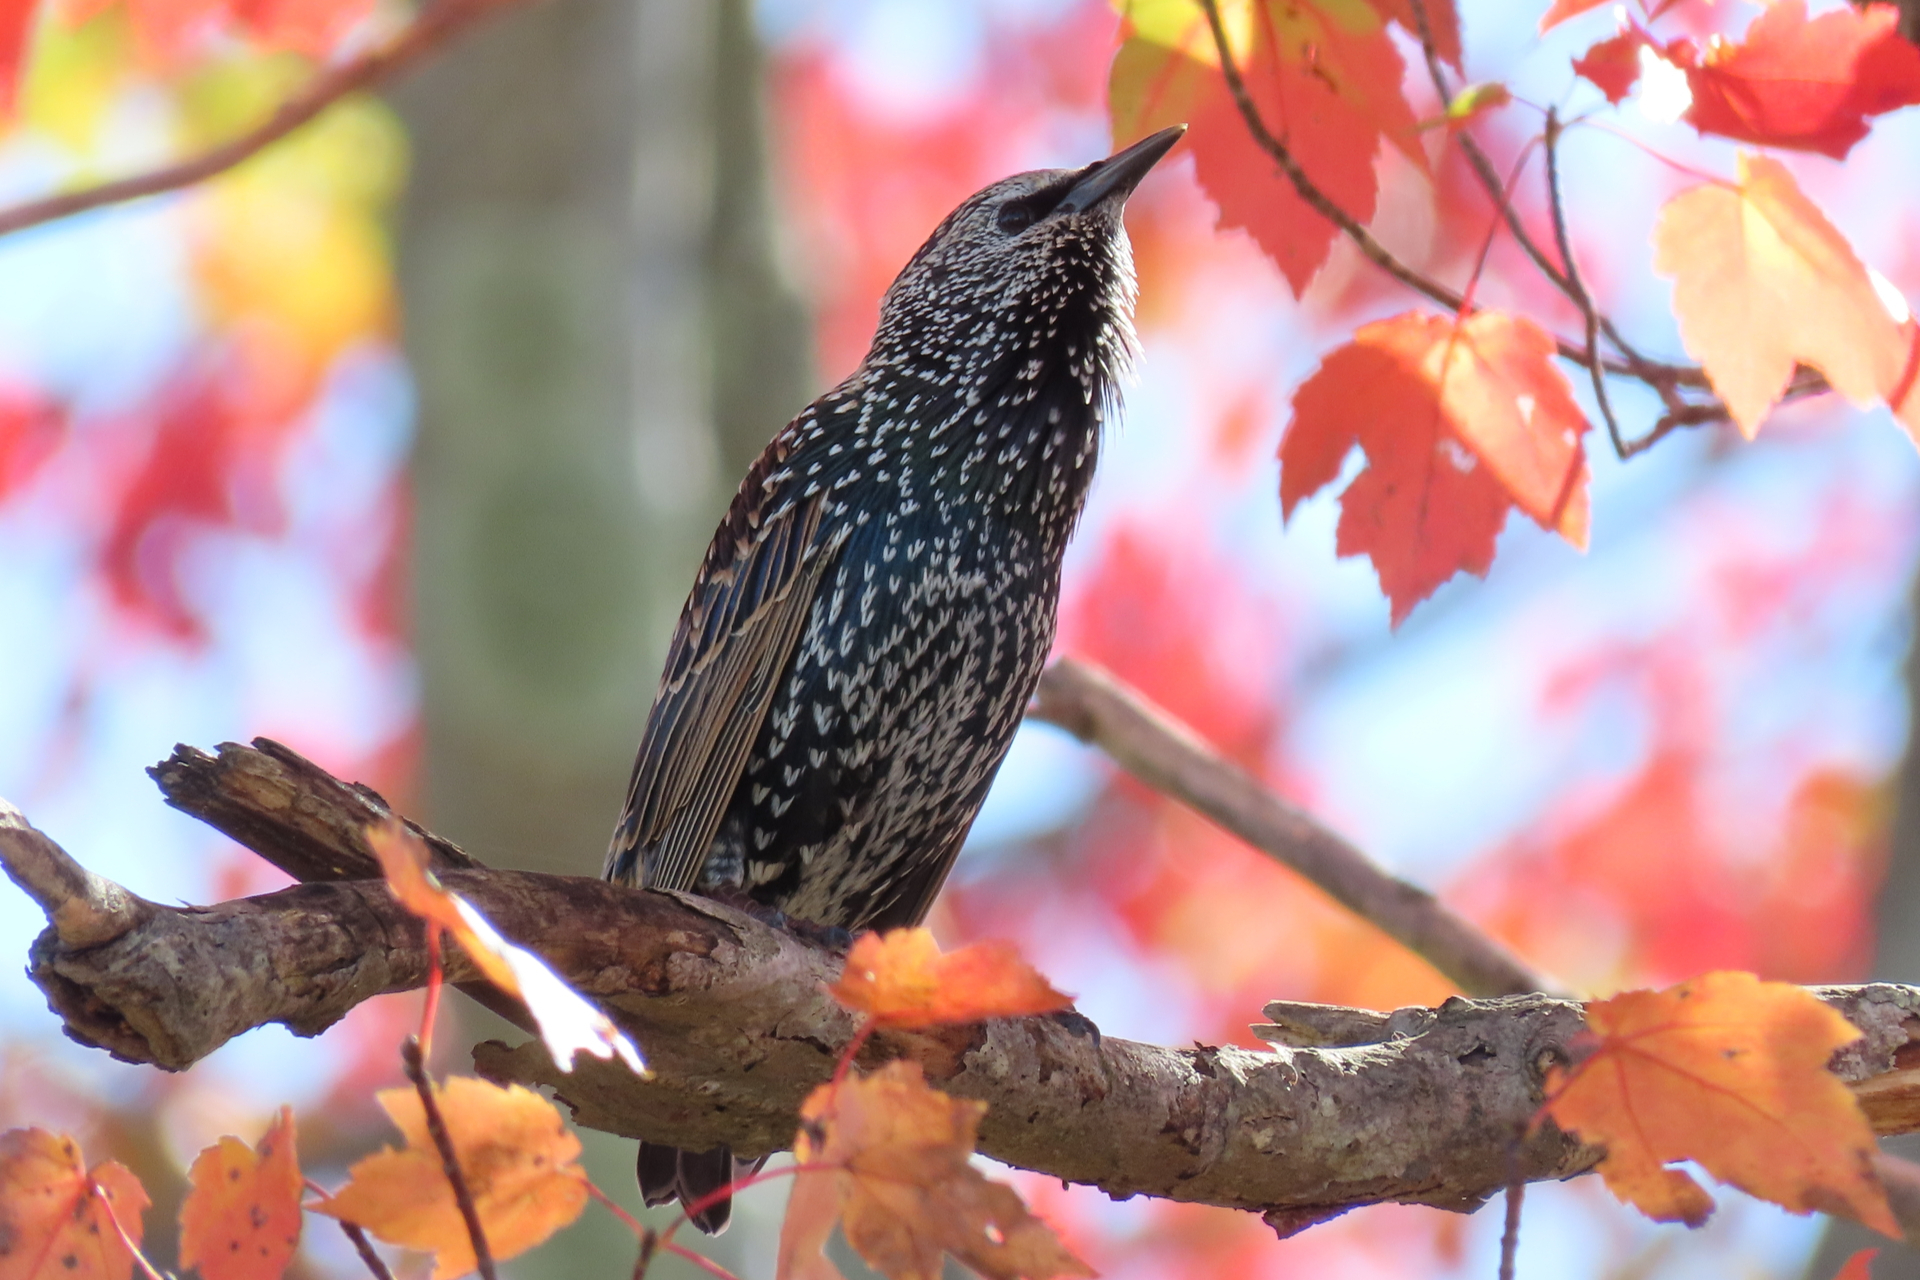 European Starling perched on branch among fall leaves